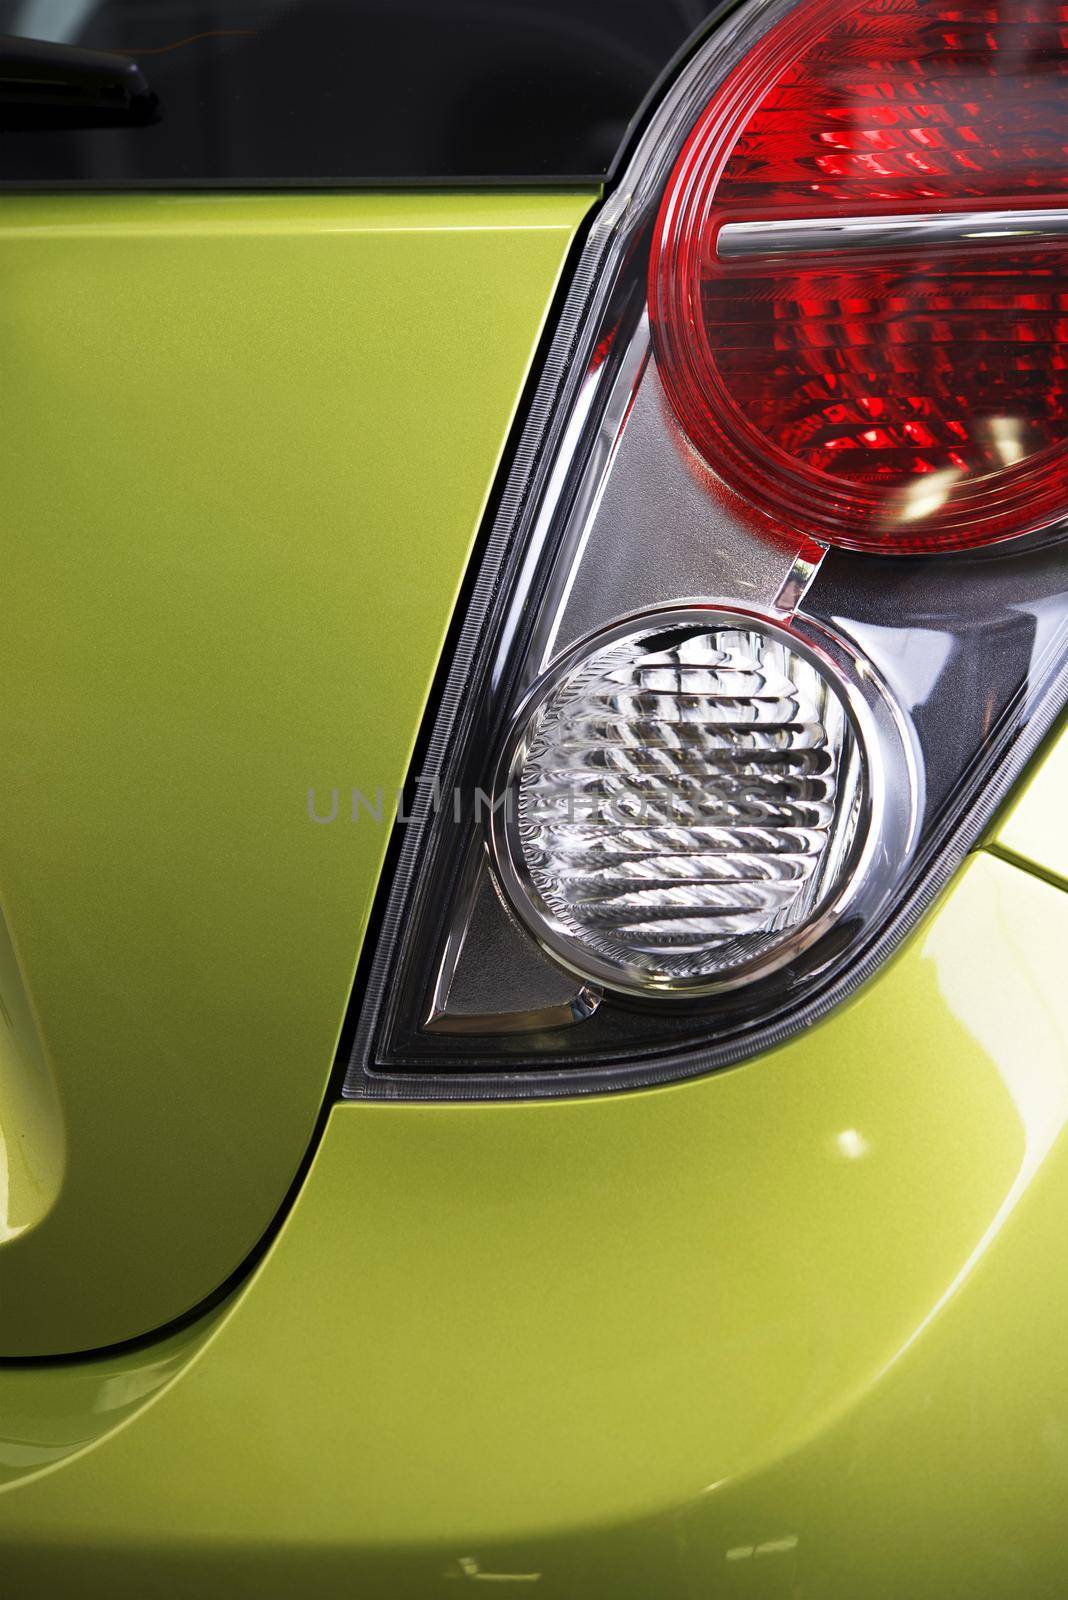 Rear Vehicle Lights. Reverse and Stop Lights Closeup. Green Vehicle Body. Transportation Photo Collection.